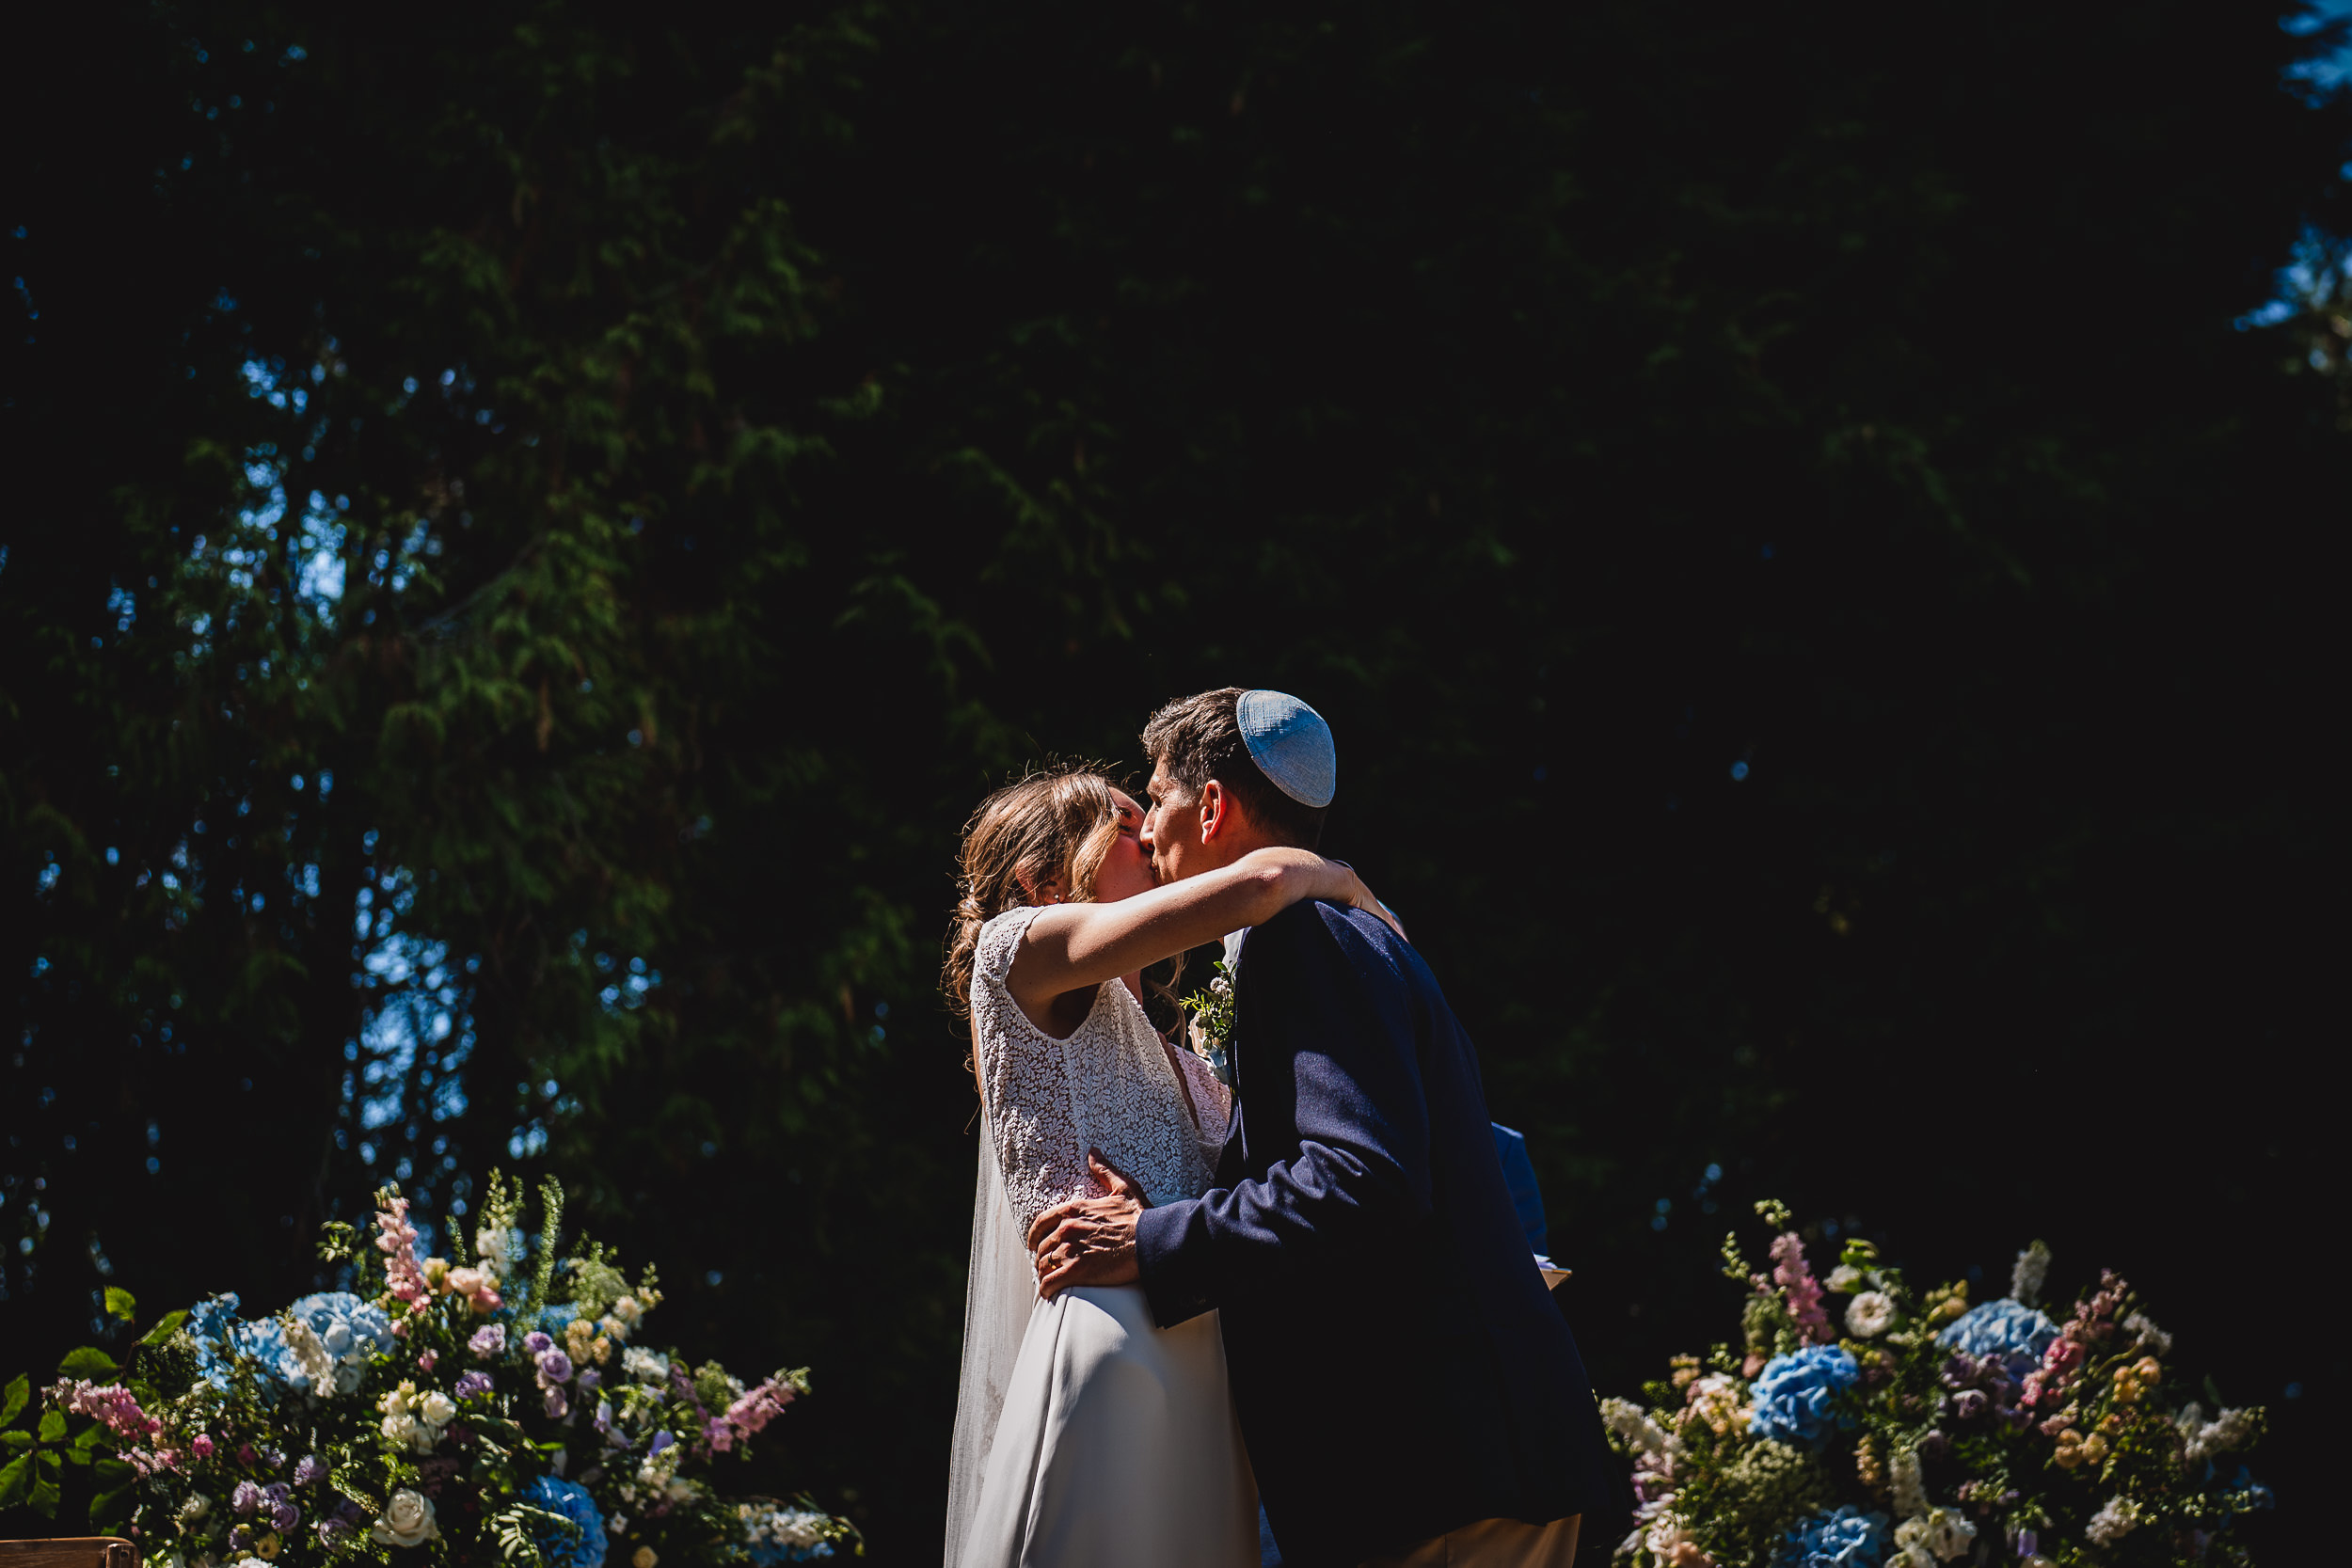 A wedding photographer capturing the groom and bride kissing under a tree in a garden.